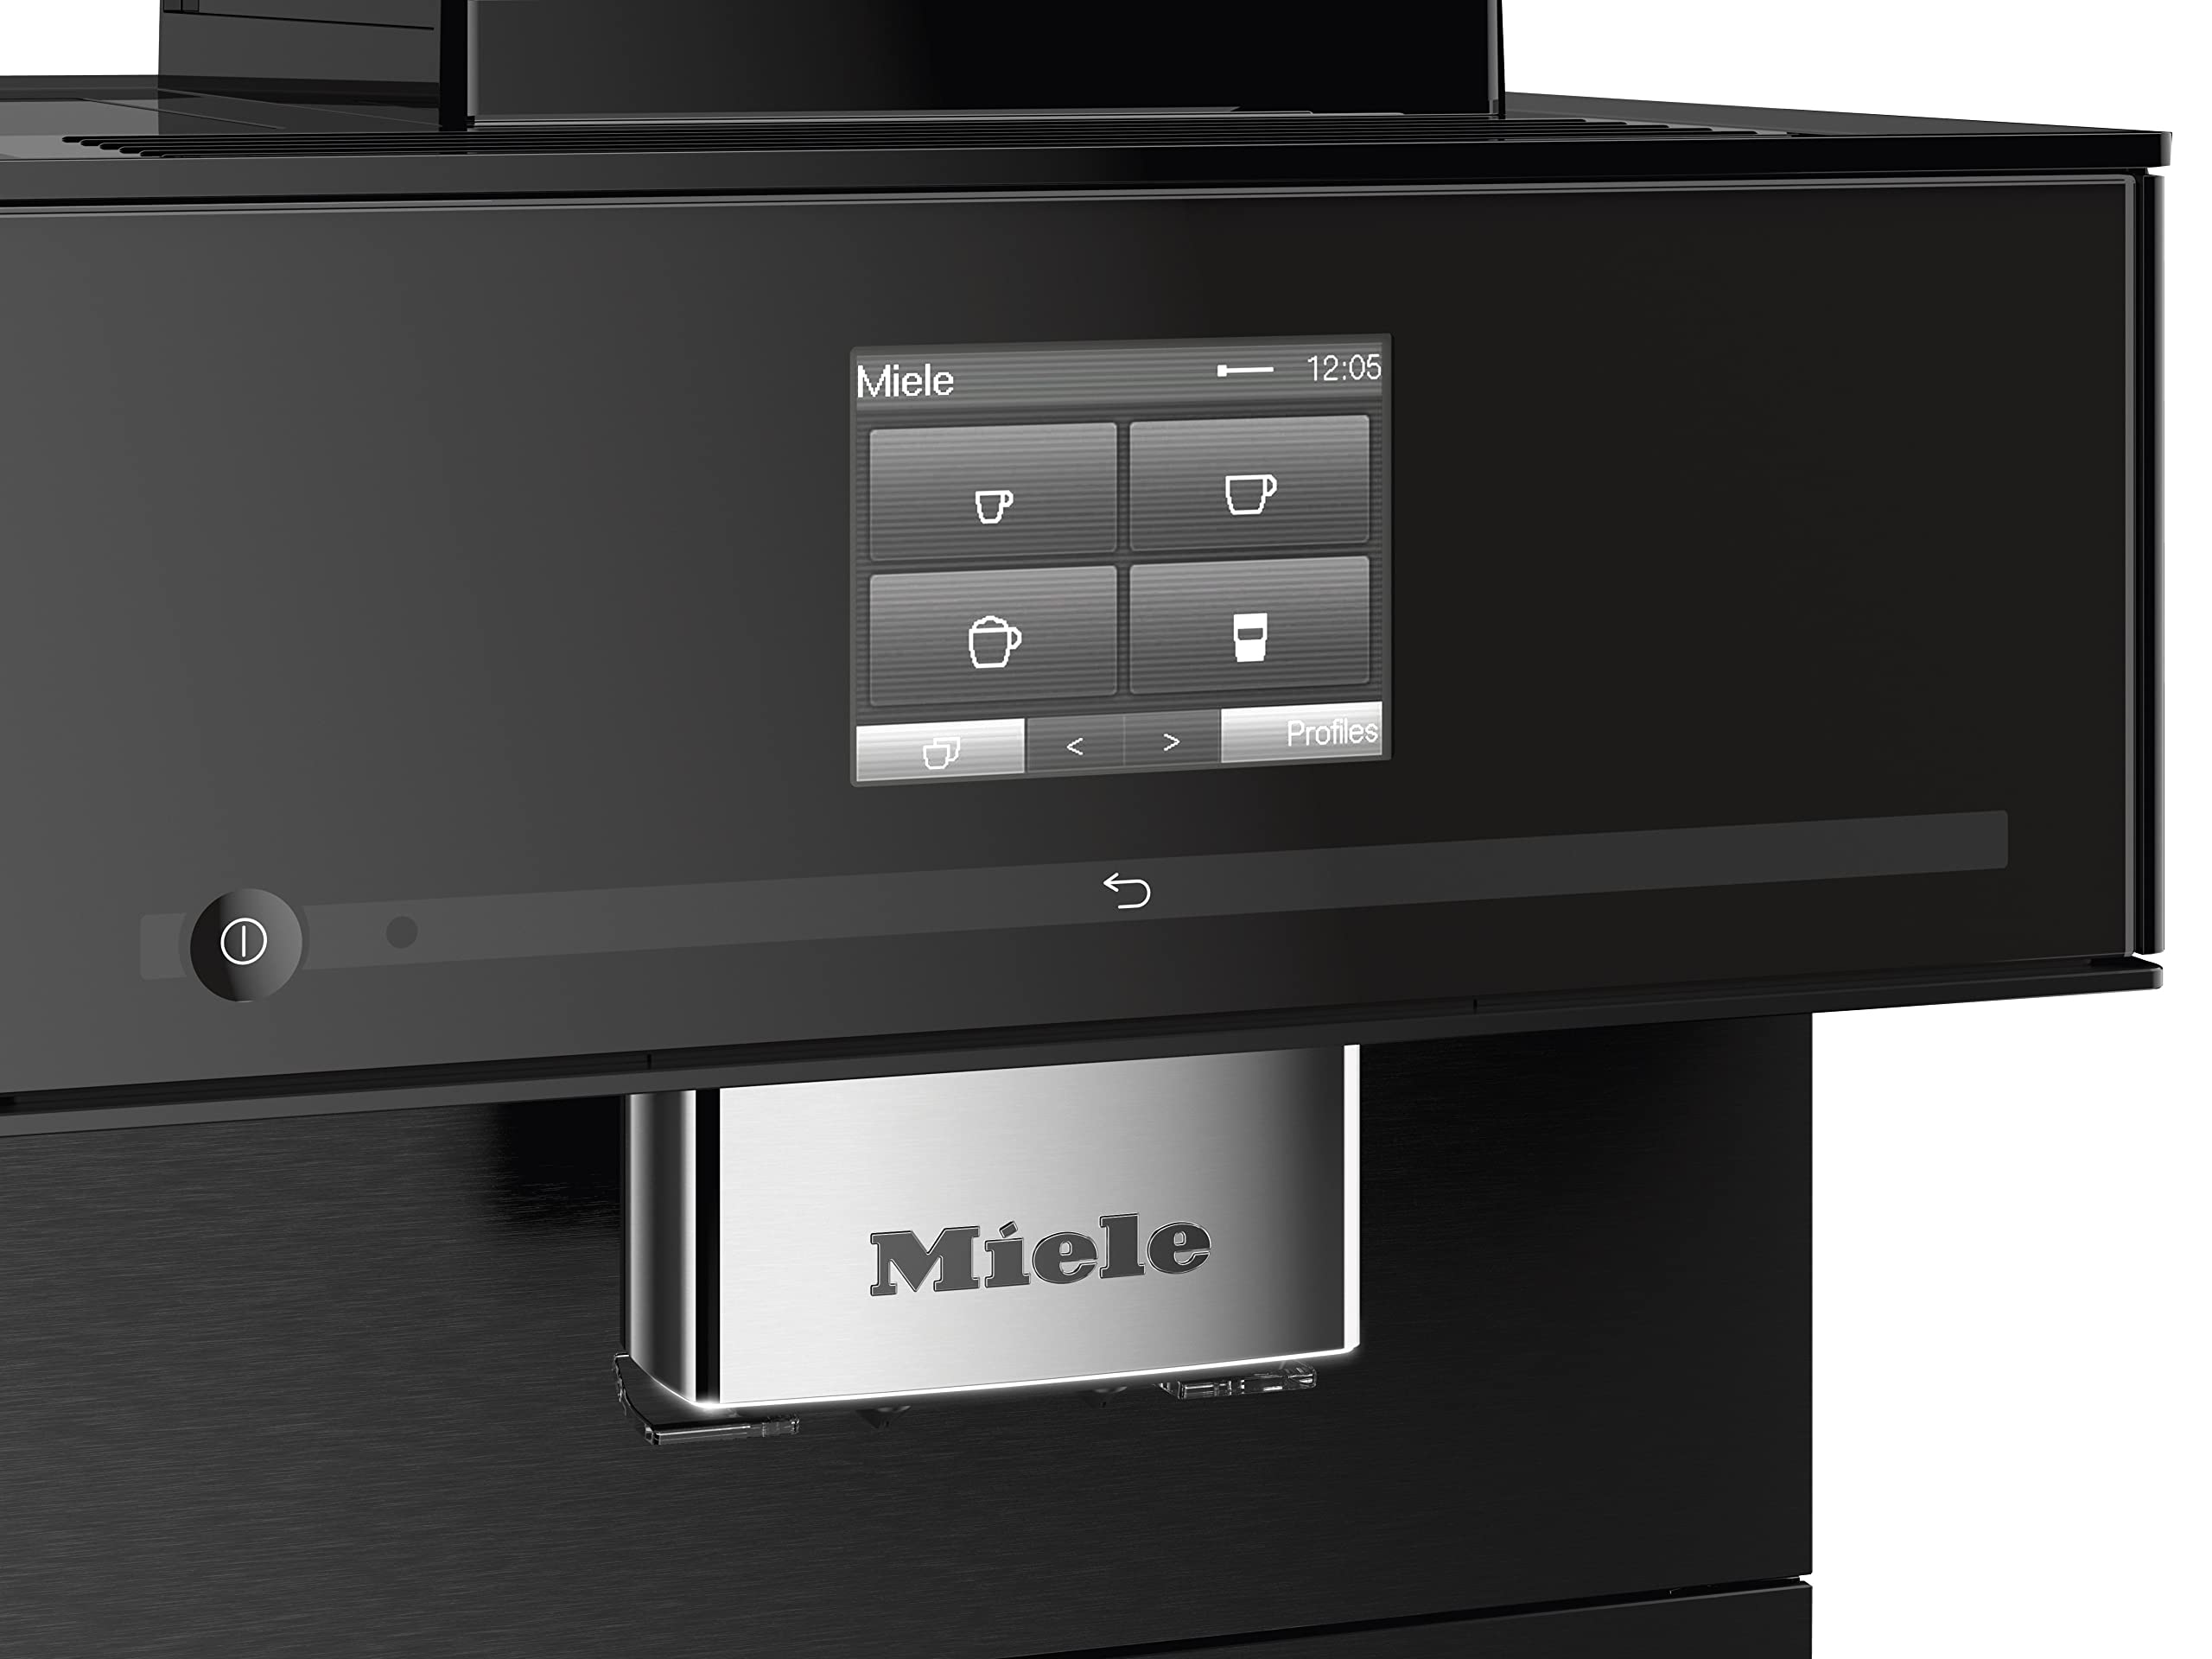 Miele NEW CM 7750 CoffeeSelect Automatic Wifi Coffee Maker & Espresso Machine Combo, 2.2 liter Obsidian Black - Grinder, Milk Frother, Cup Warmer, Glass Milk Container, Select From Multiple Beans